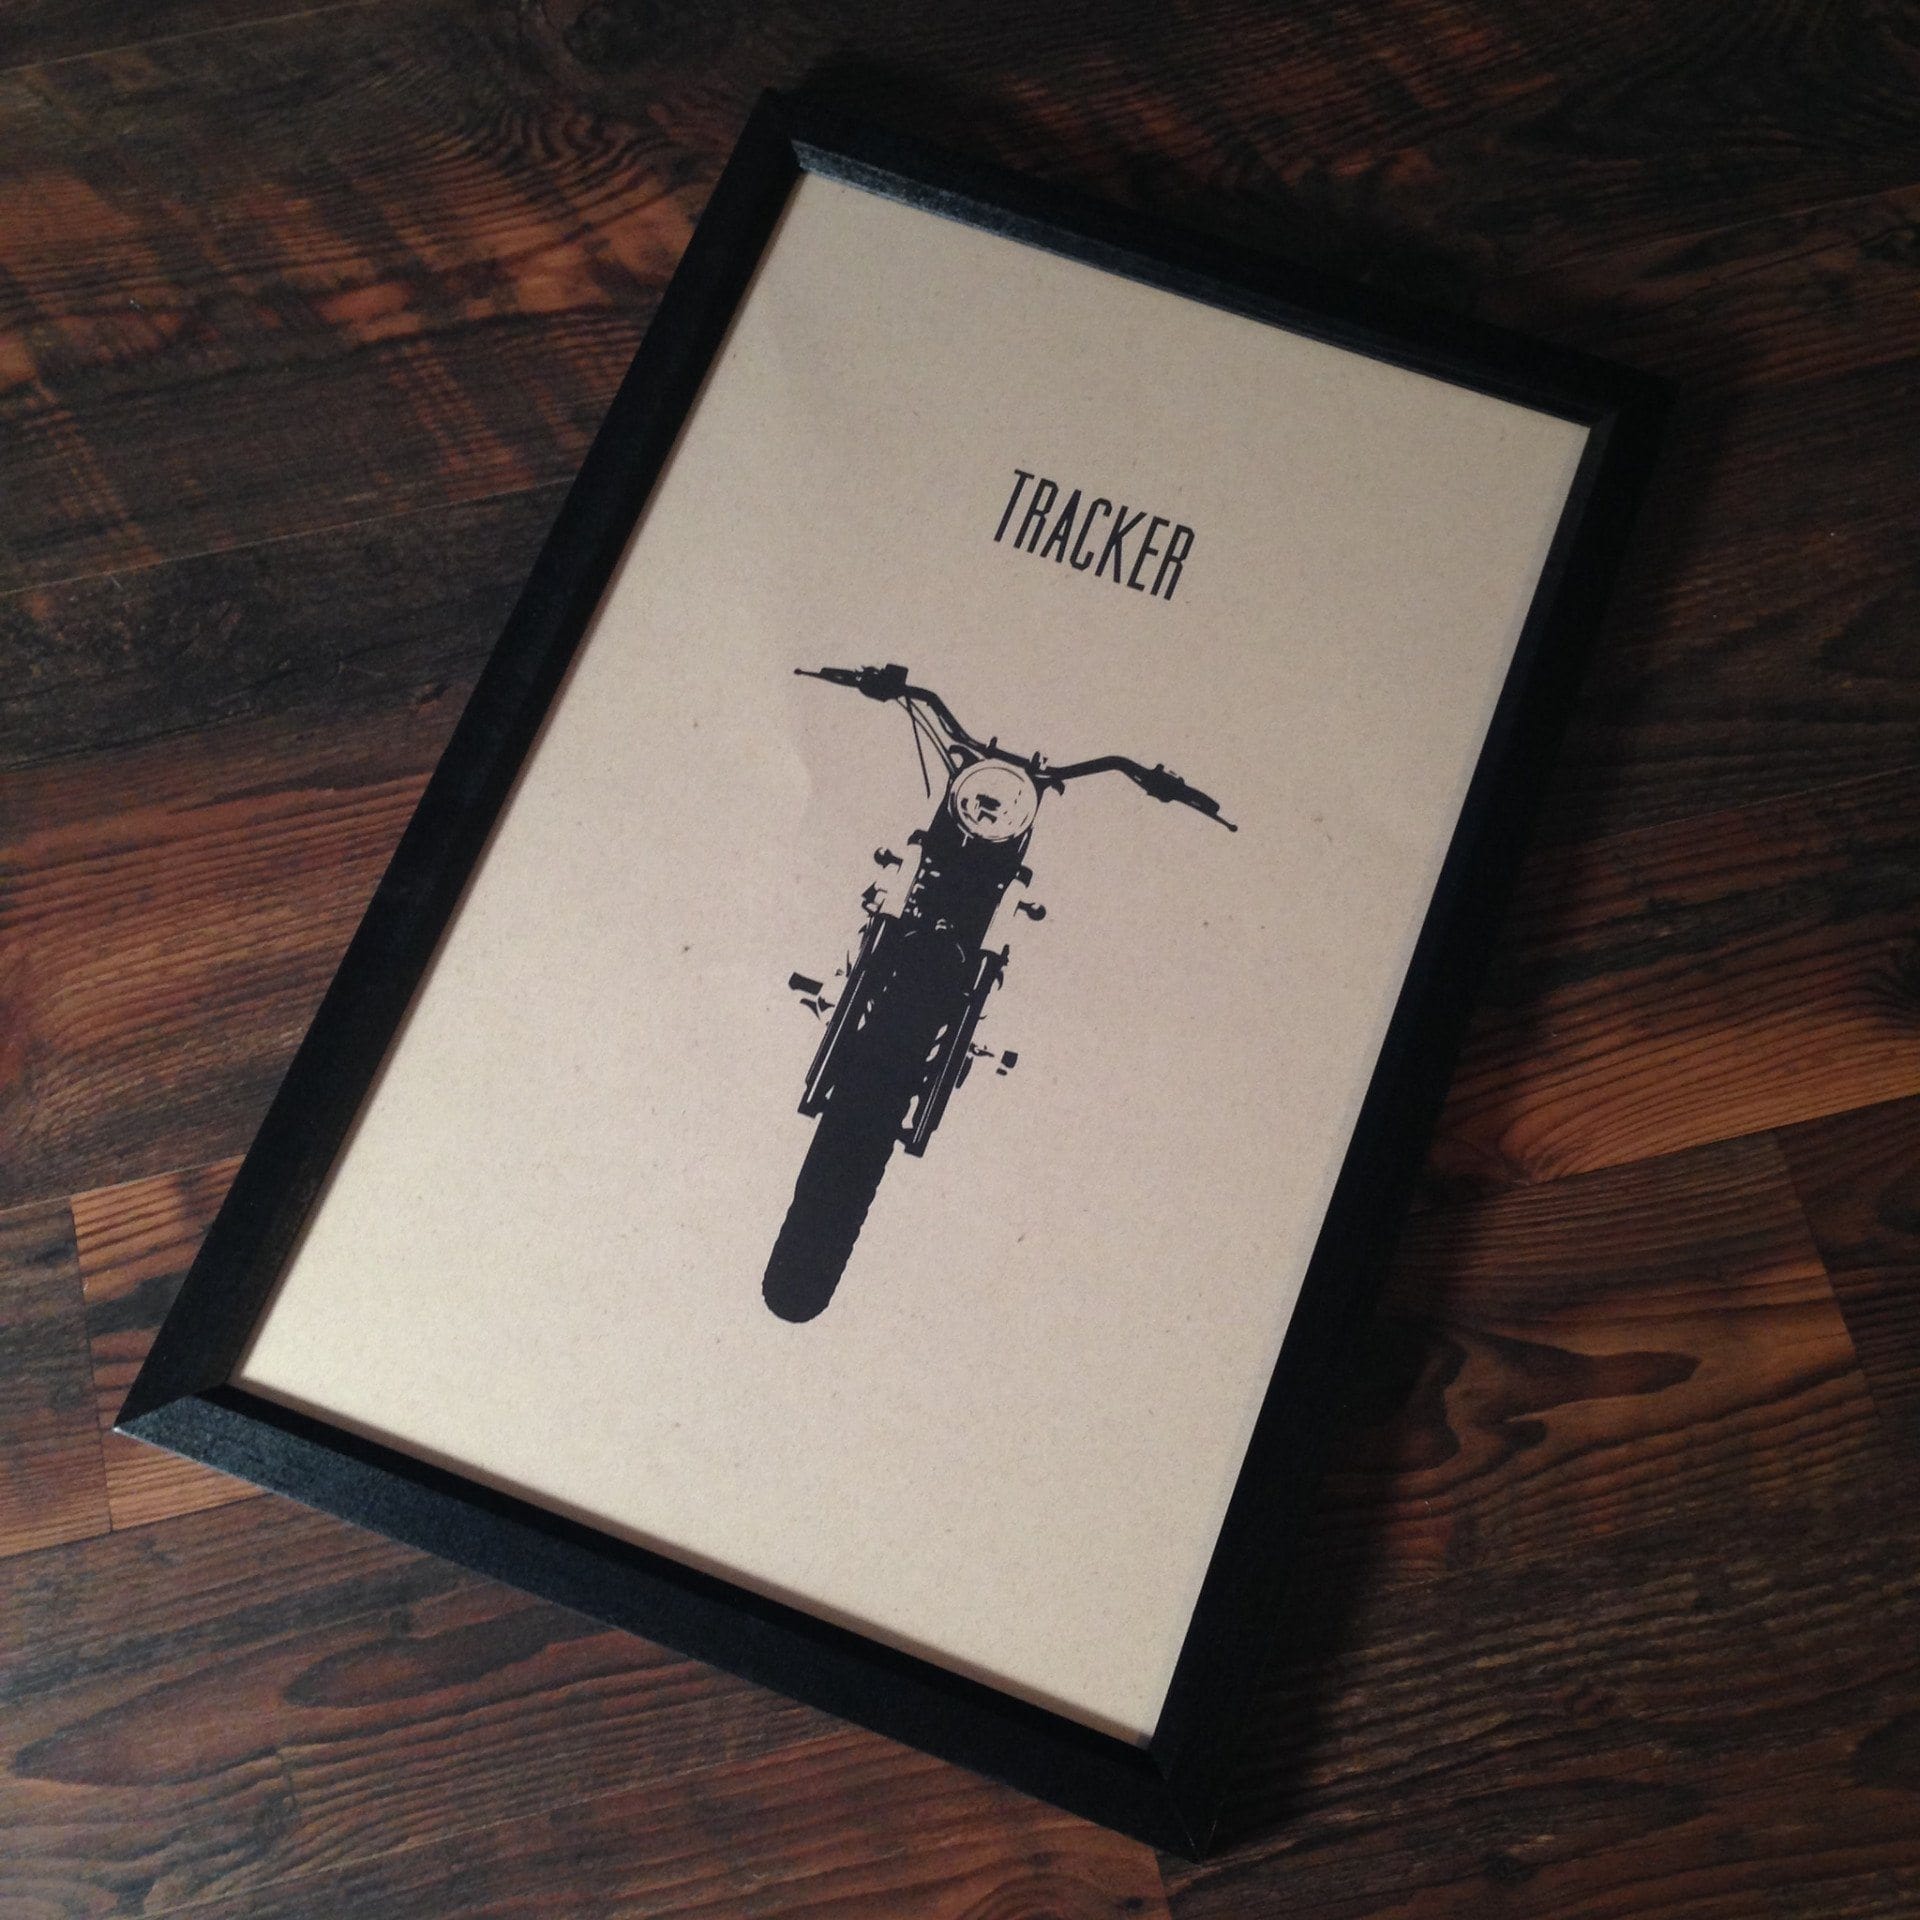 Limited Edition "Tracker" Motorcycle Framed Poster by Inked Iron - Cognito Moto